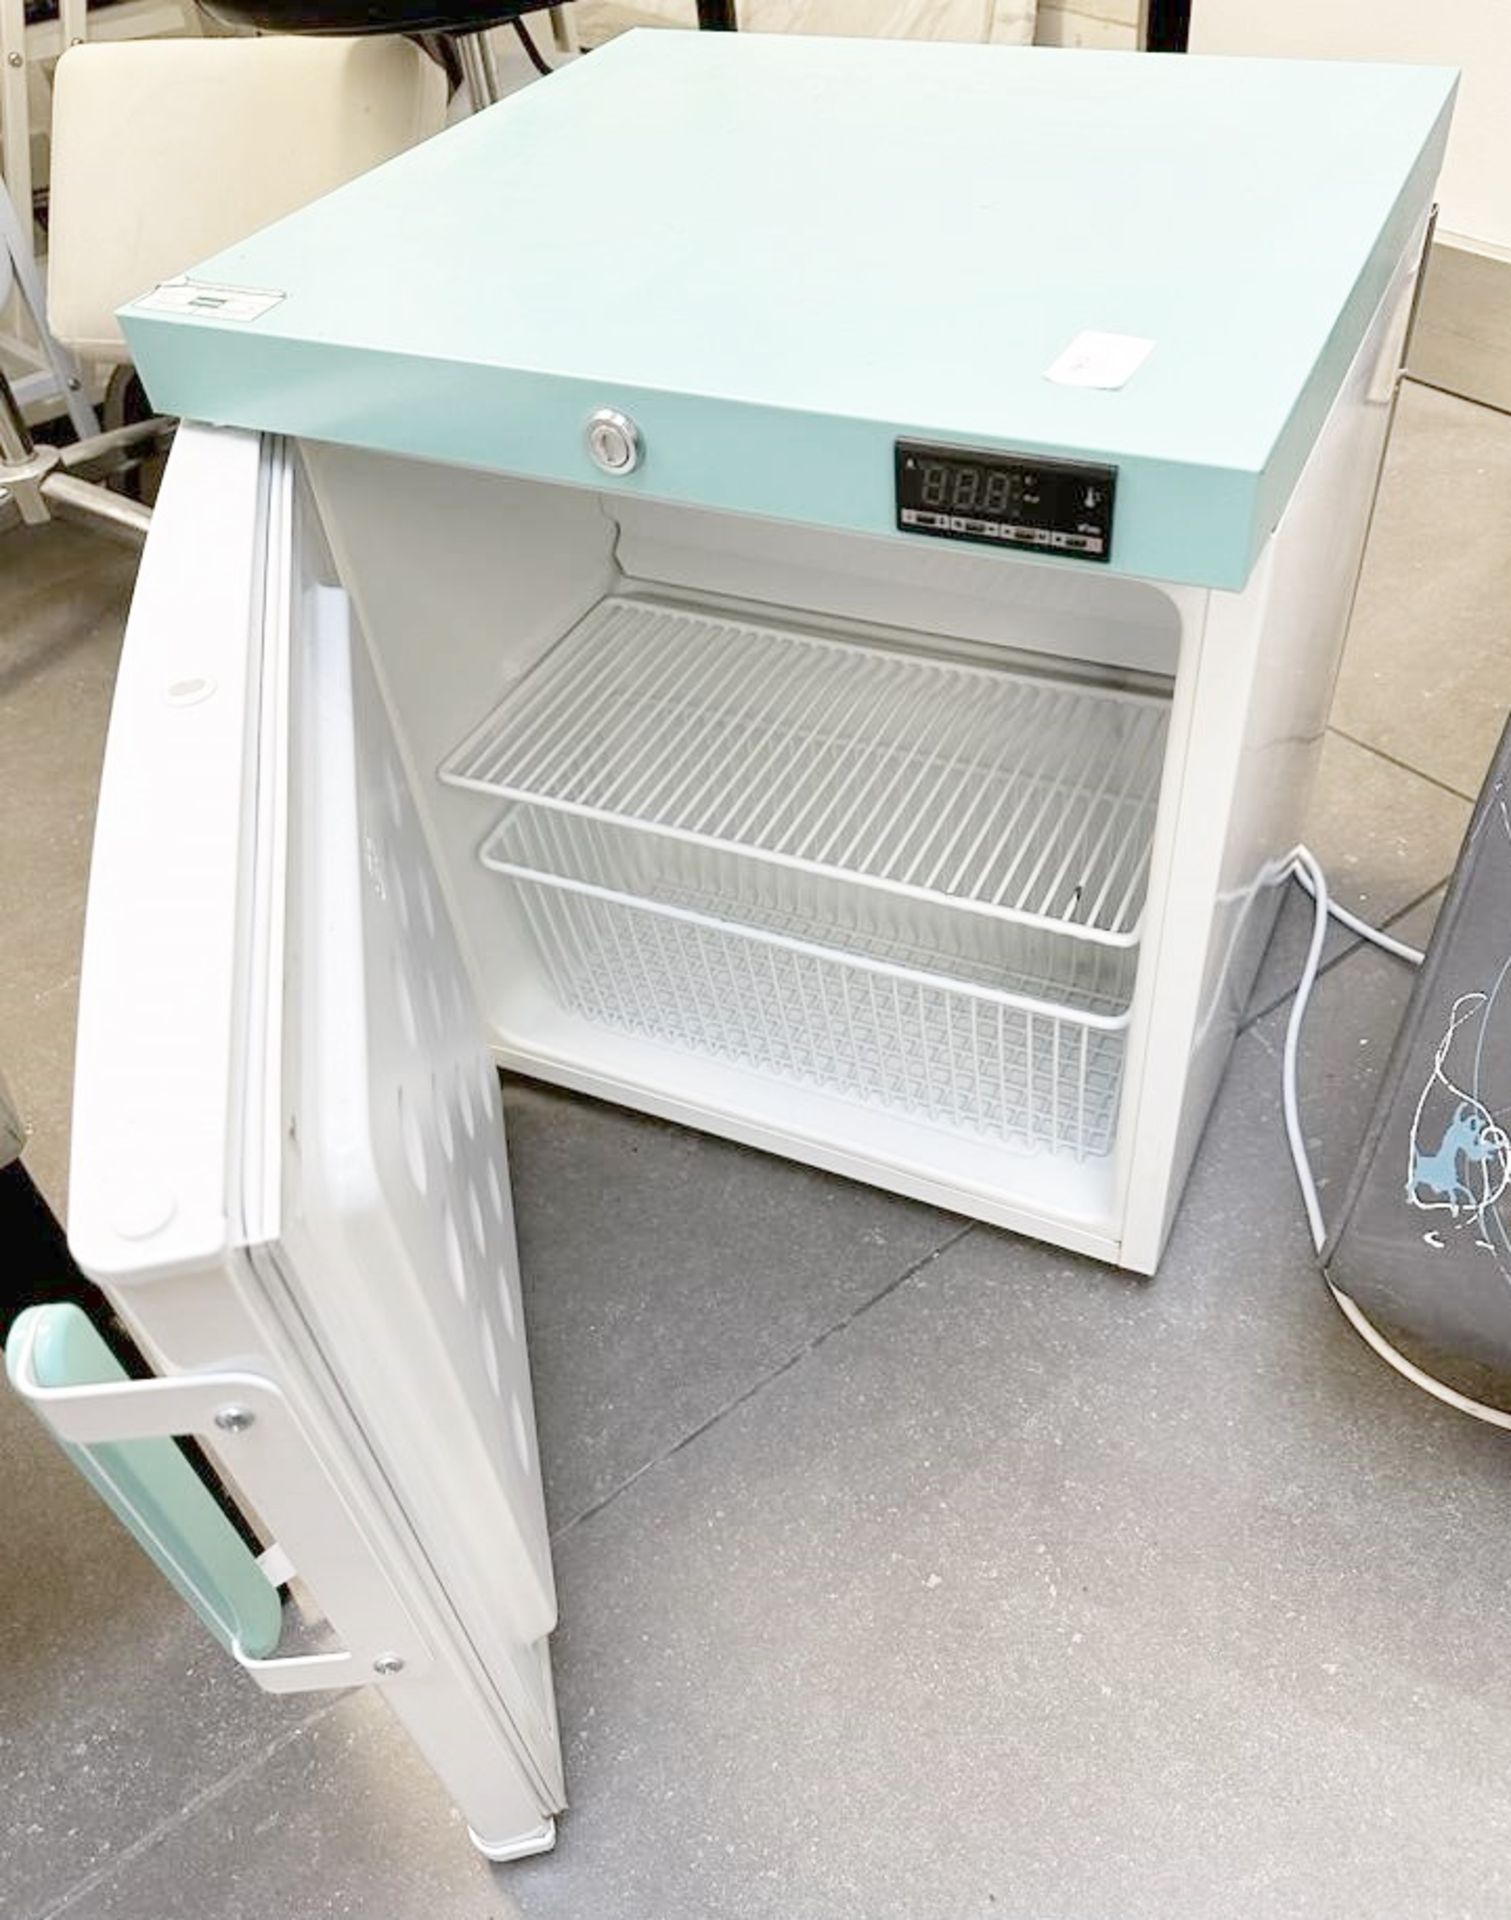 1 x LEC Under-counter Medical Fridge - From An Award-winning Chelsea Hair Salon - Ref: 000 - CL828 - Image 2 of 3